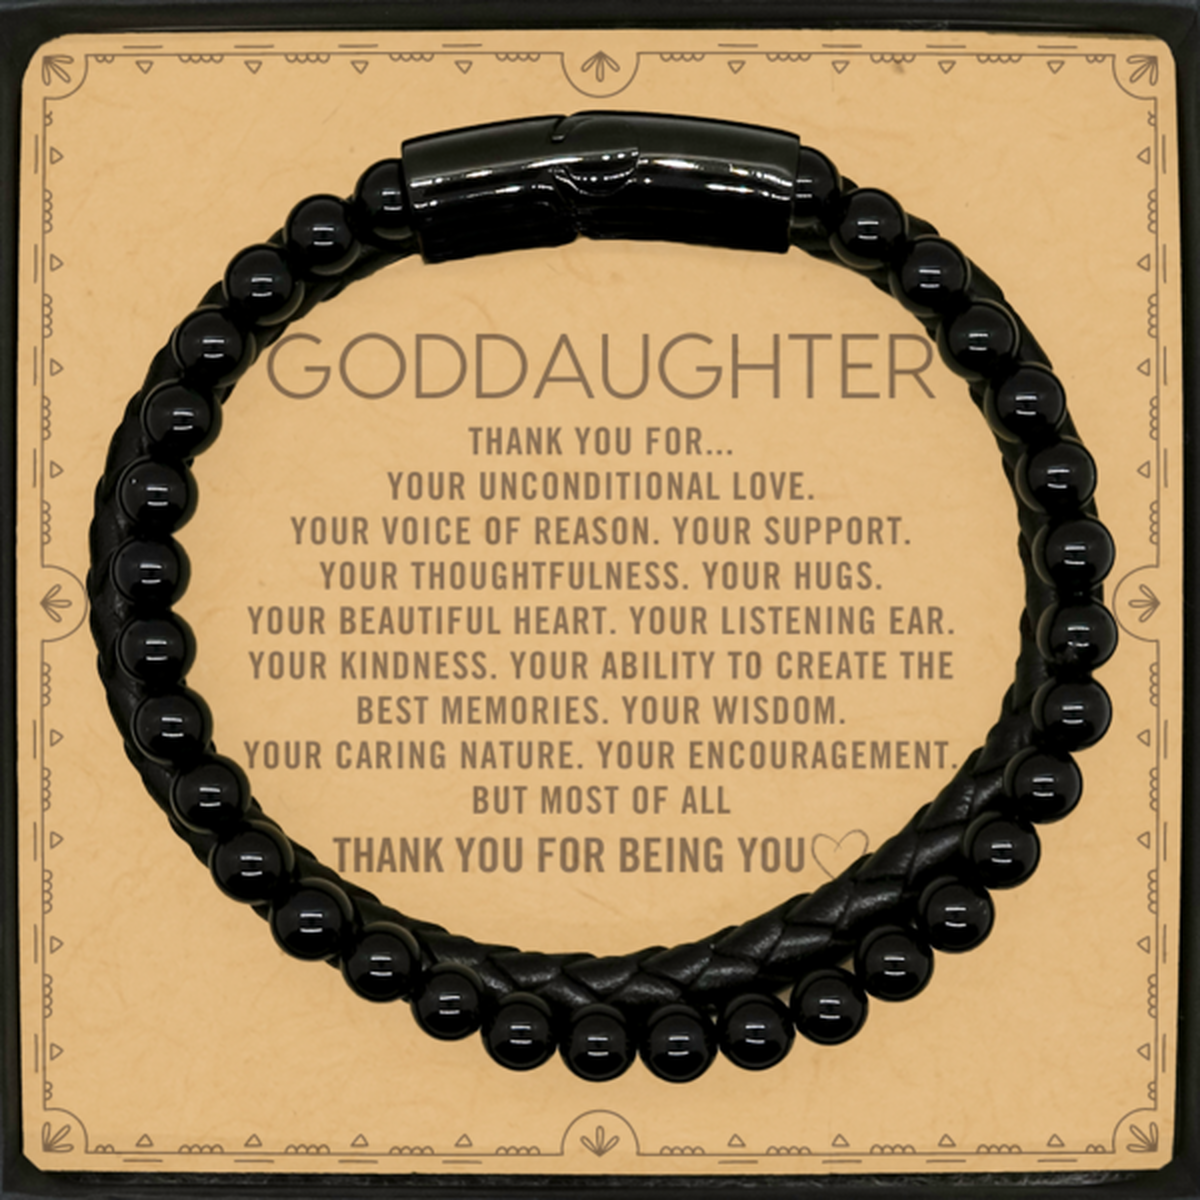 Goddaughter Stone Leather Bracelets Custom, Message Card Gifts For Goddaughter Christmas Graduation Birthday Gifts for Men Women Goddaughter Thank you for Your unconditional love